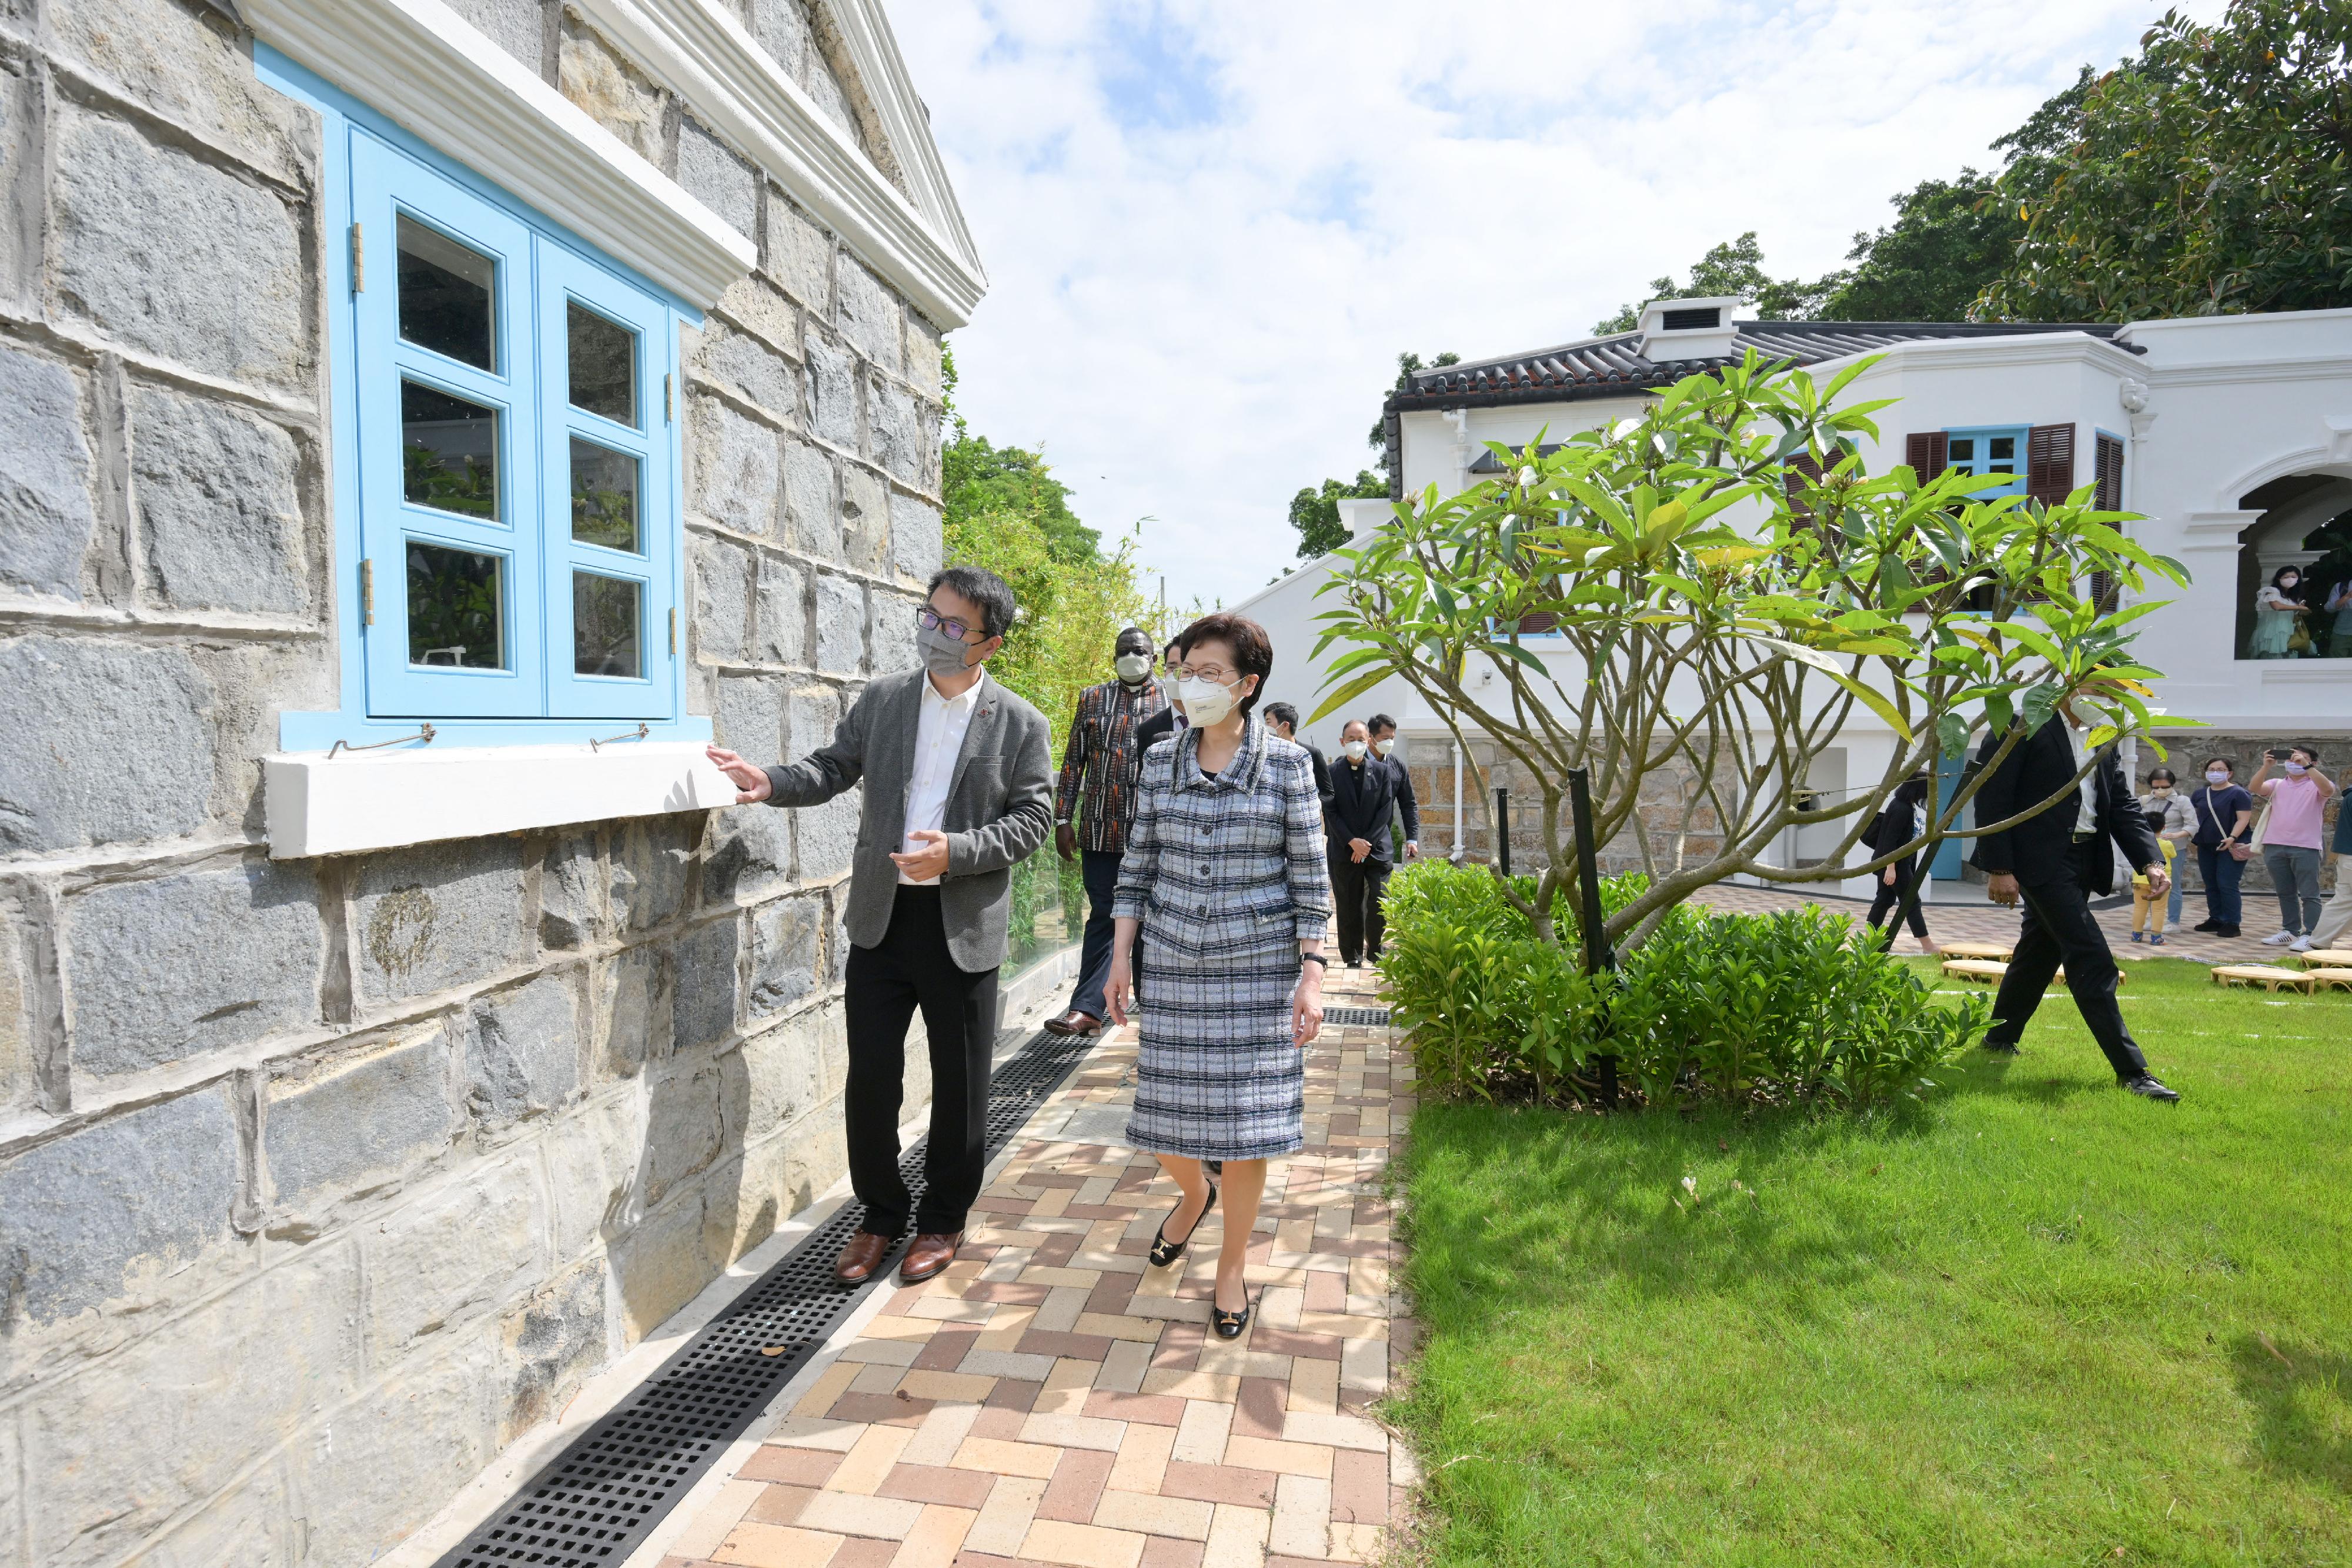 The Chief Executive, Mrs Carrie Lam (front row, right), today (April 22) visited The Pokfulam Farm to learn more about the revitalisation of the Old Dairy Farm Senior Staff Quarters in Pok Fu Lam under Batch IV of the Revitalising Historic Buildings Through Partnership Scheme.